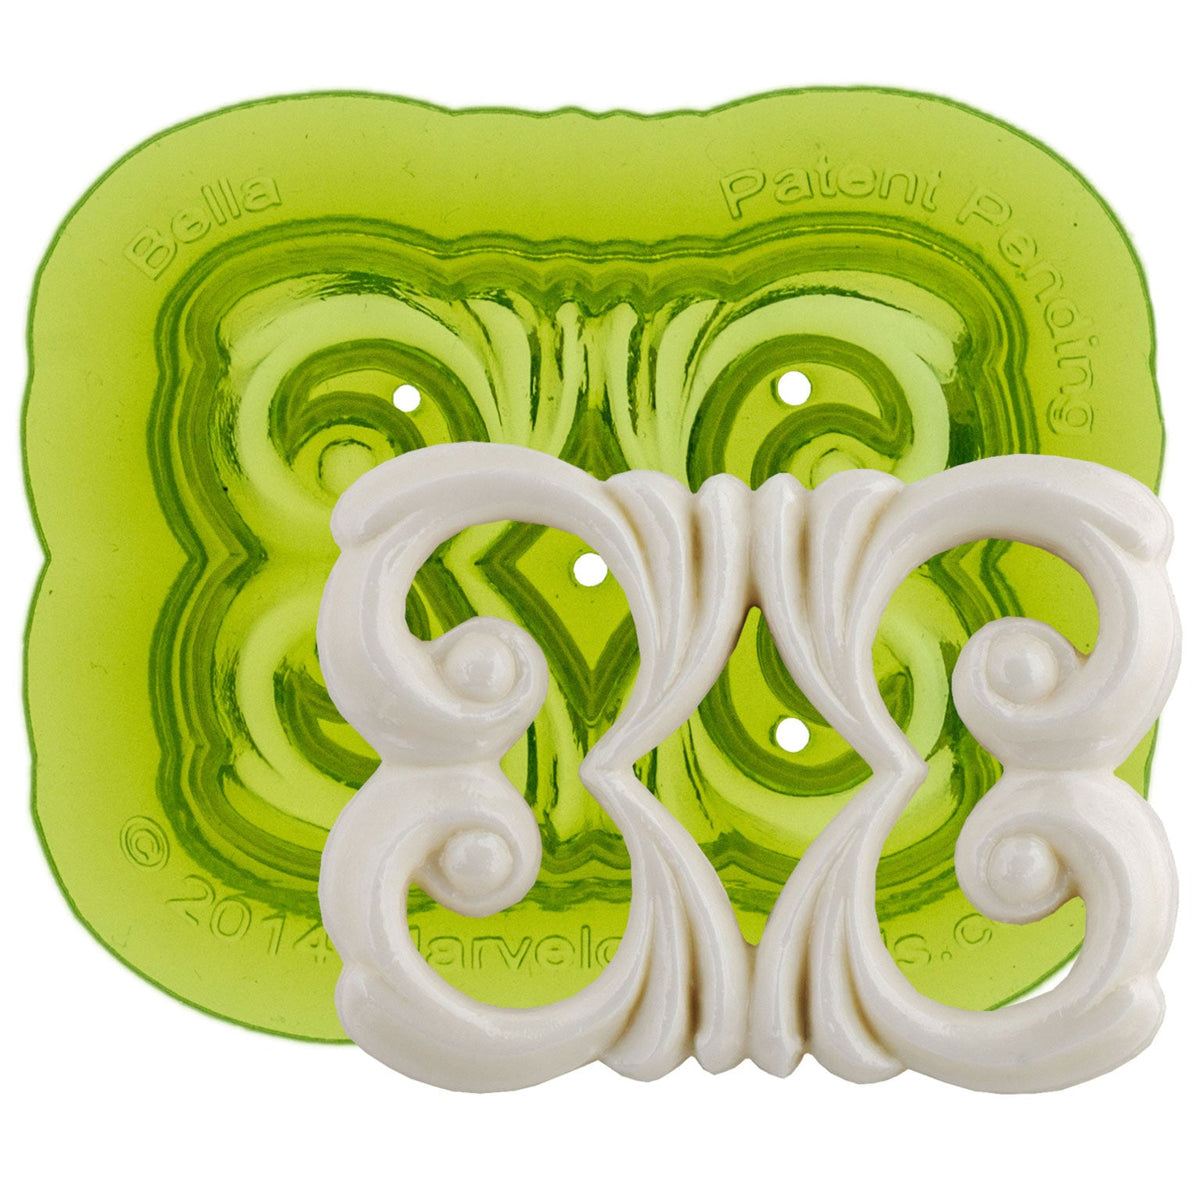 Bella Scroll Silicone Sprig Mold for Ceramics or Resin Crafts by Marvelous Molds